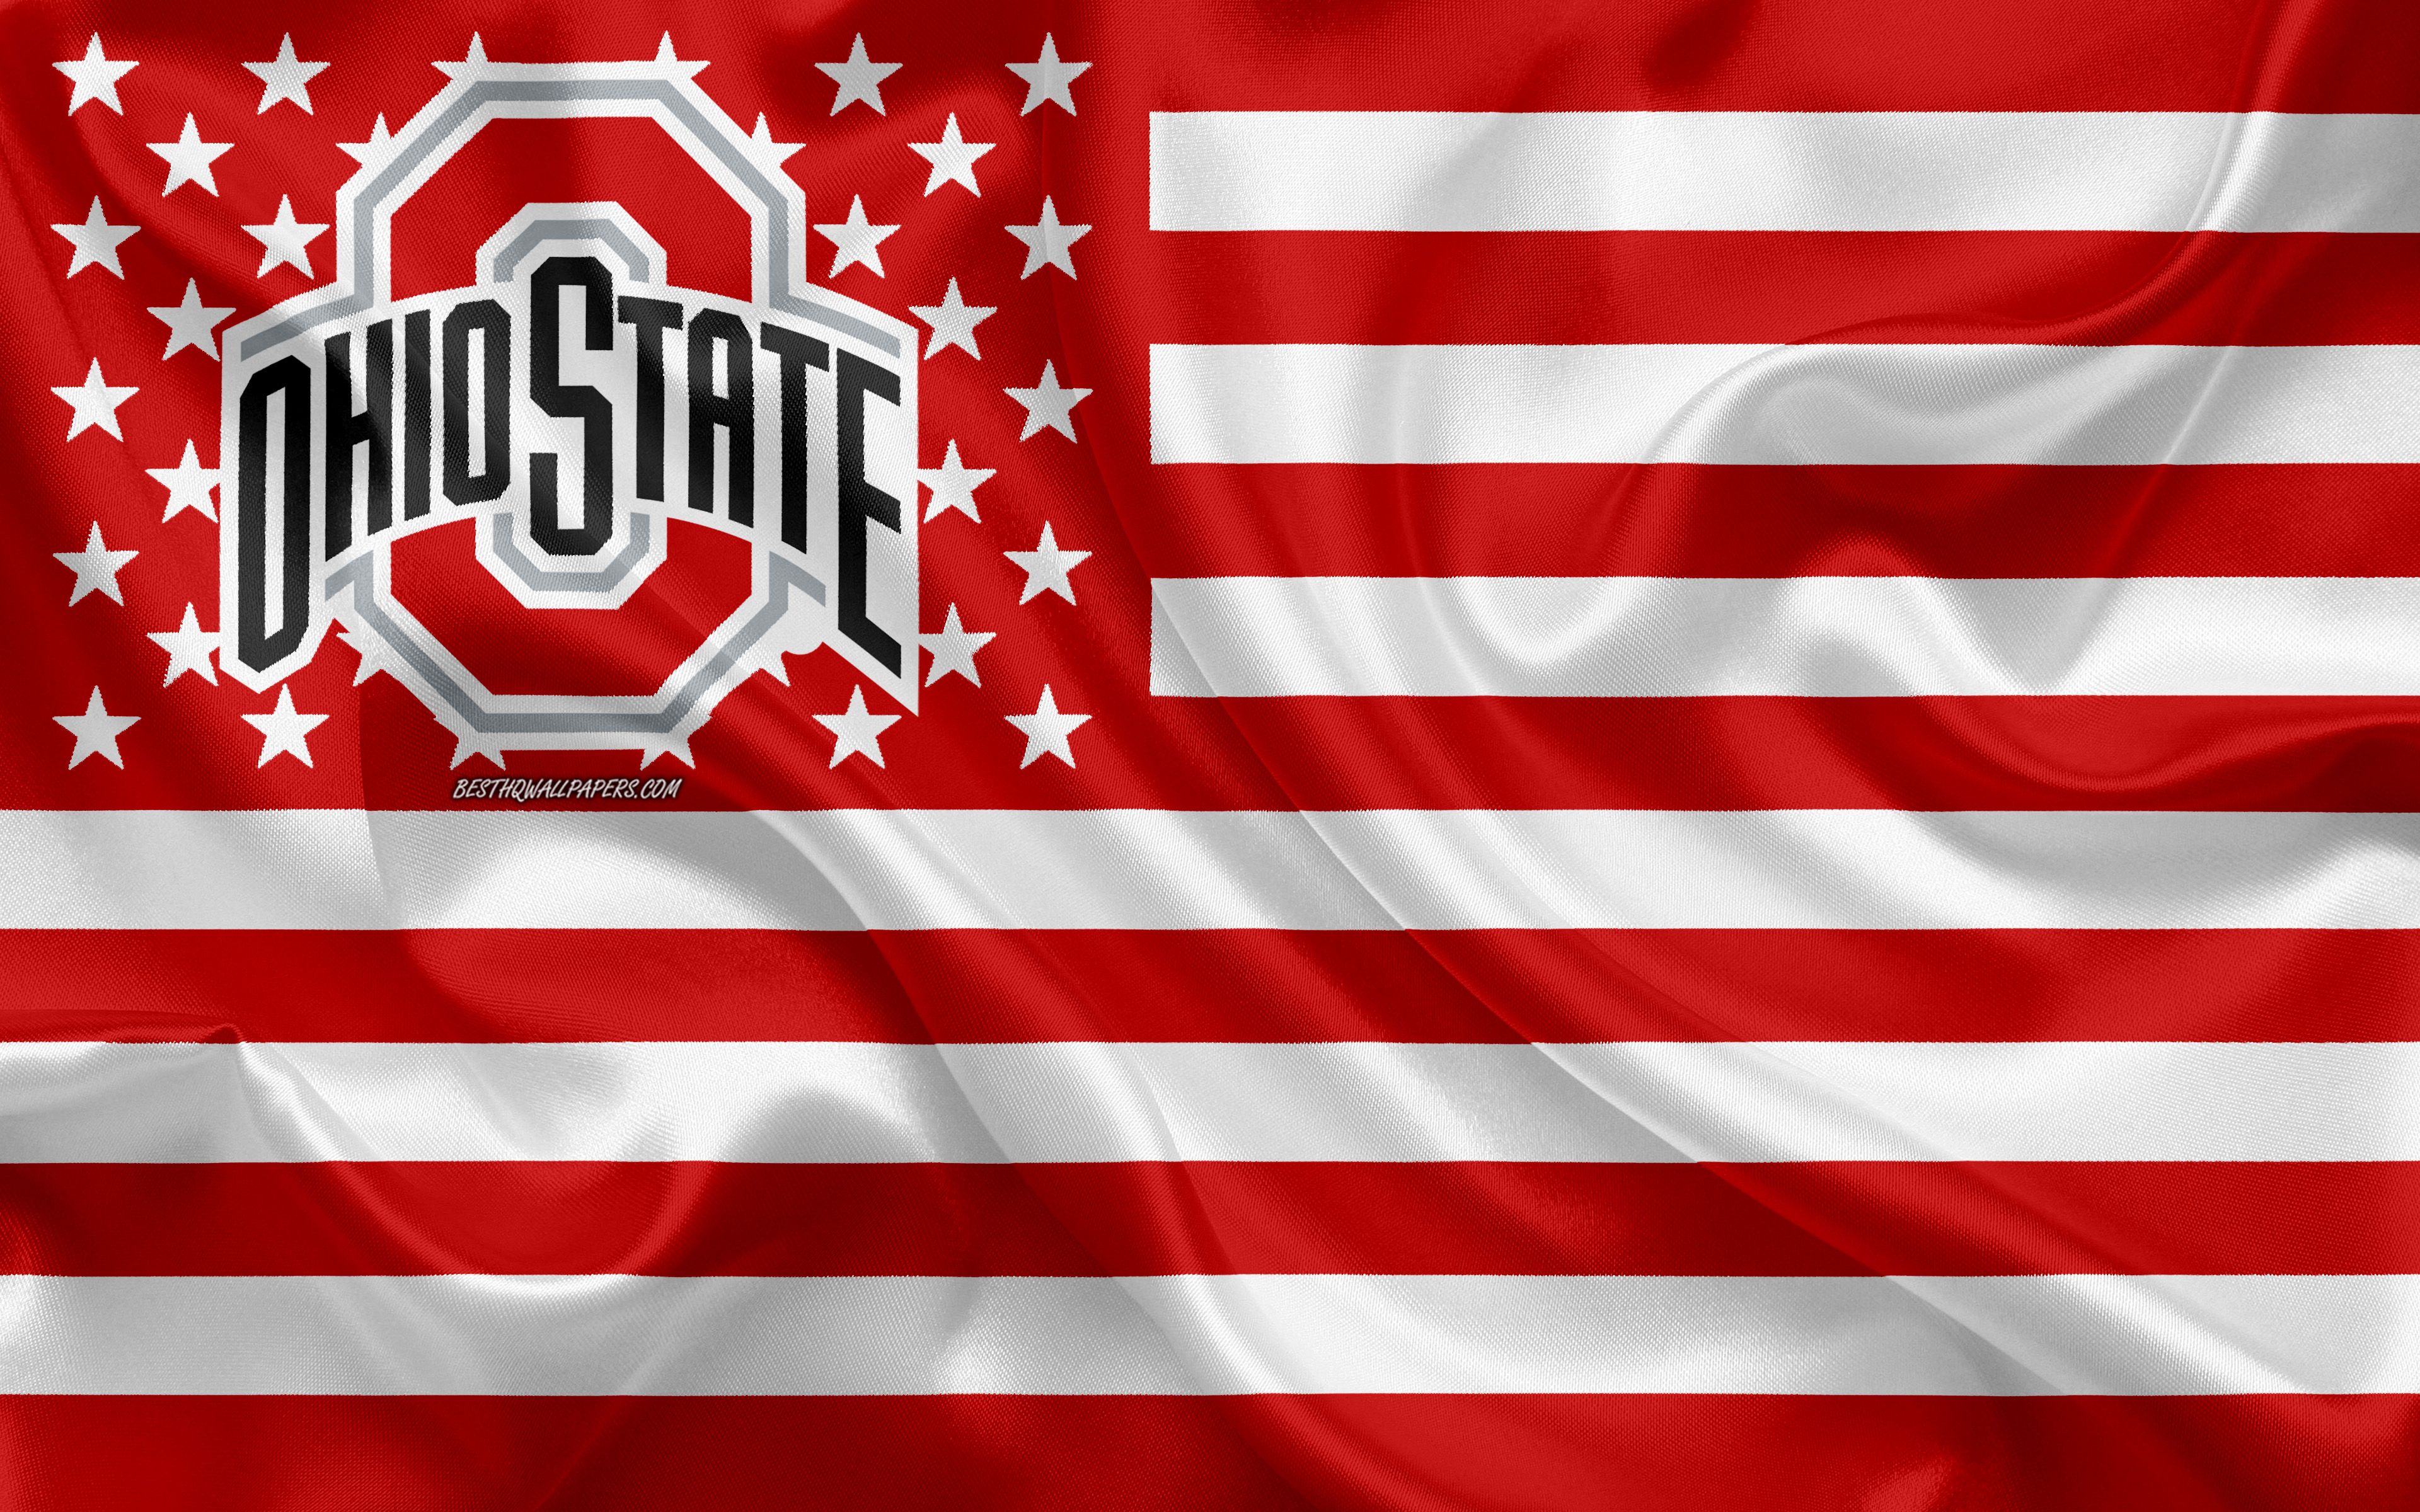 Download wallpaper Ohio State Buckeyes, American football team, creative American flag, red white flag, NCAA, Columbus, Ohio, USA, Ohio State Buckeyes logo, emblem, silk flag, American football for desktop with resolution 3840x2400